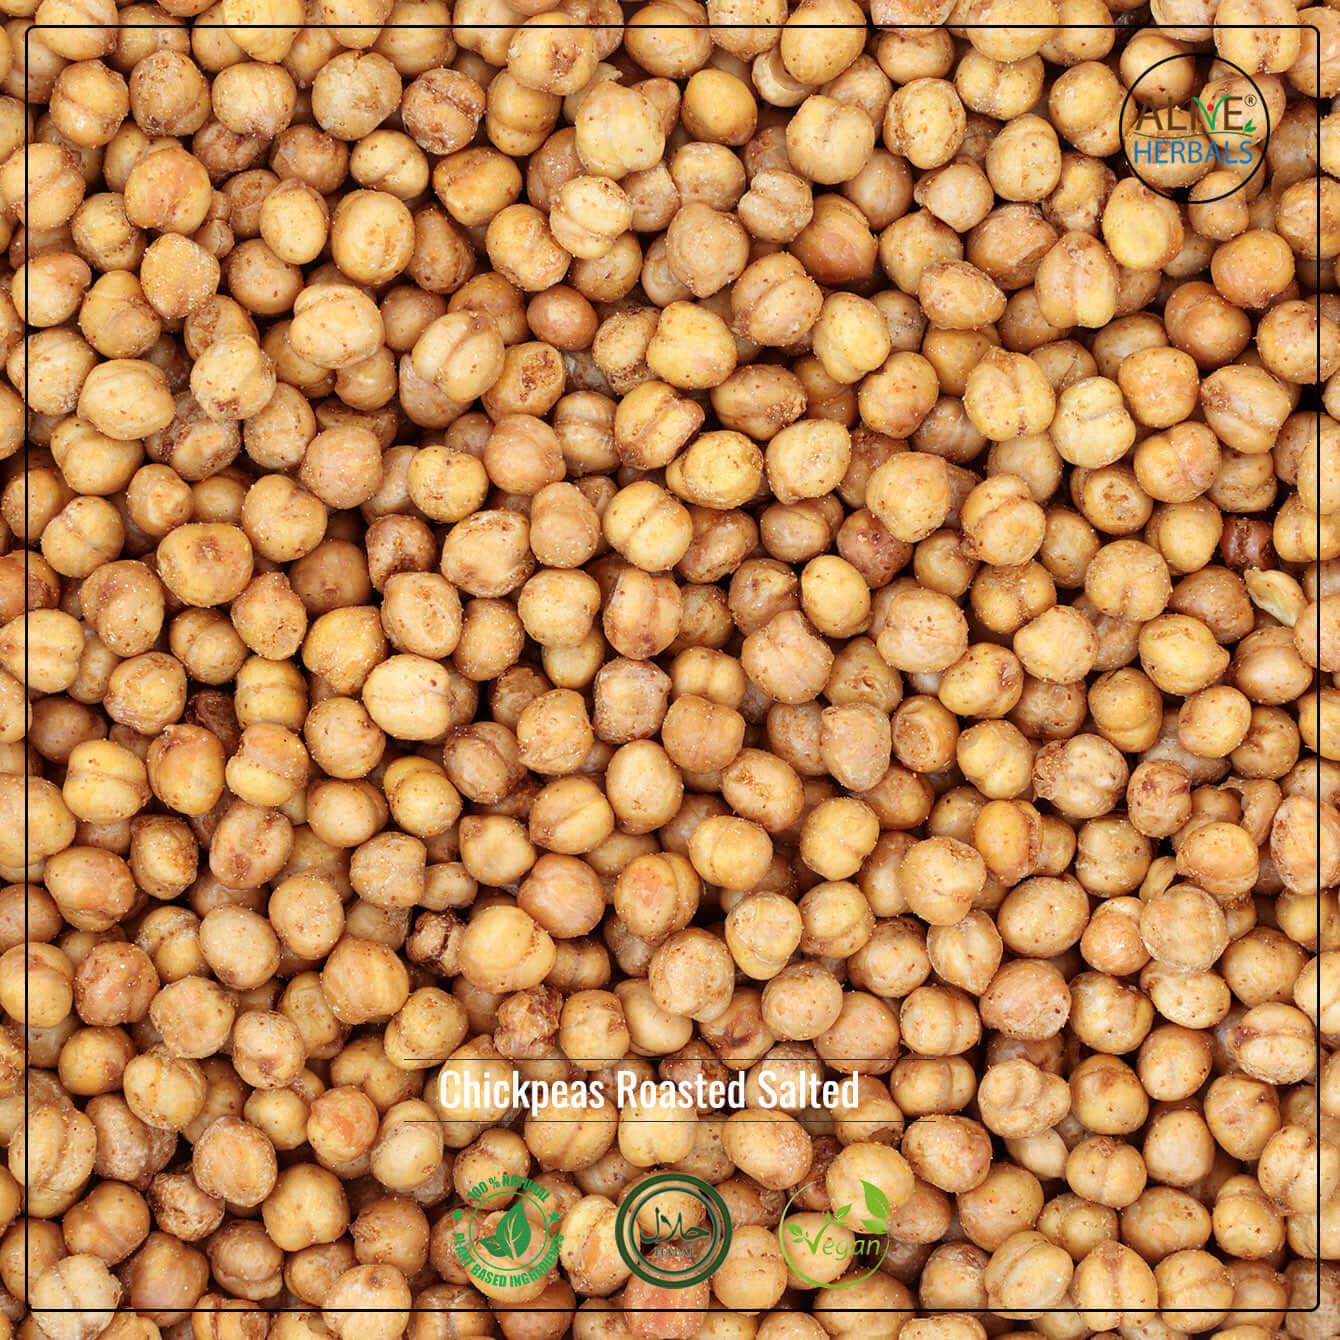 Roasted Salted Chickpeas - Buy at Natural Food Store | Alive Herbals.